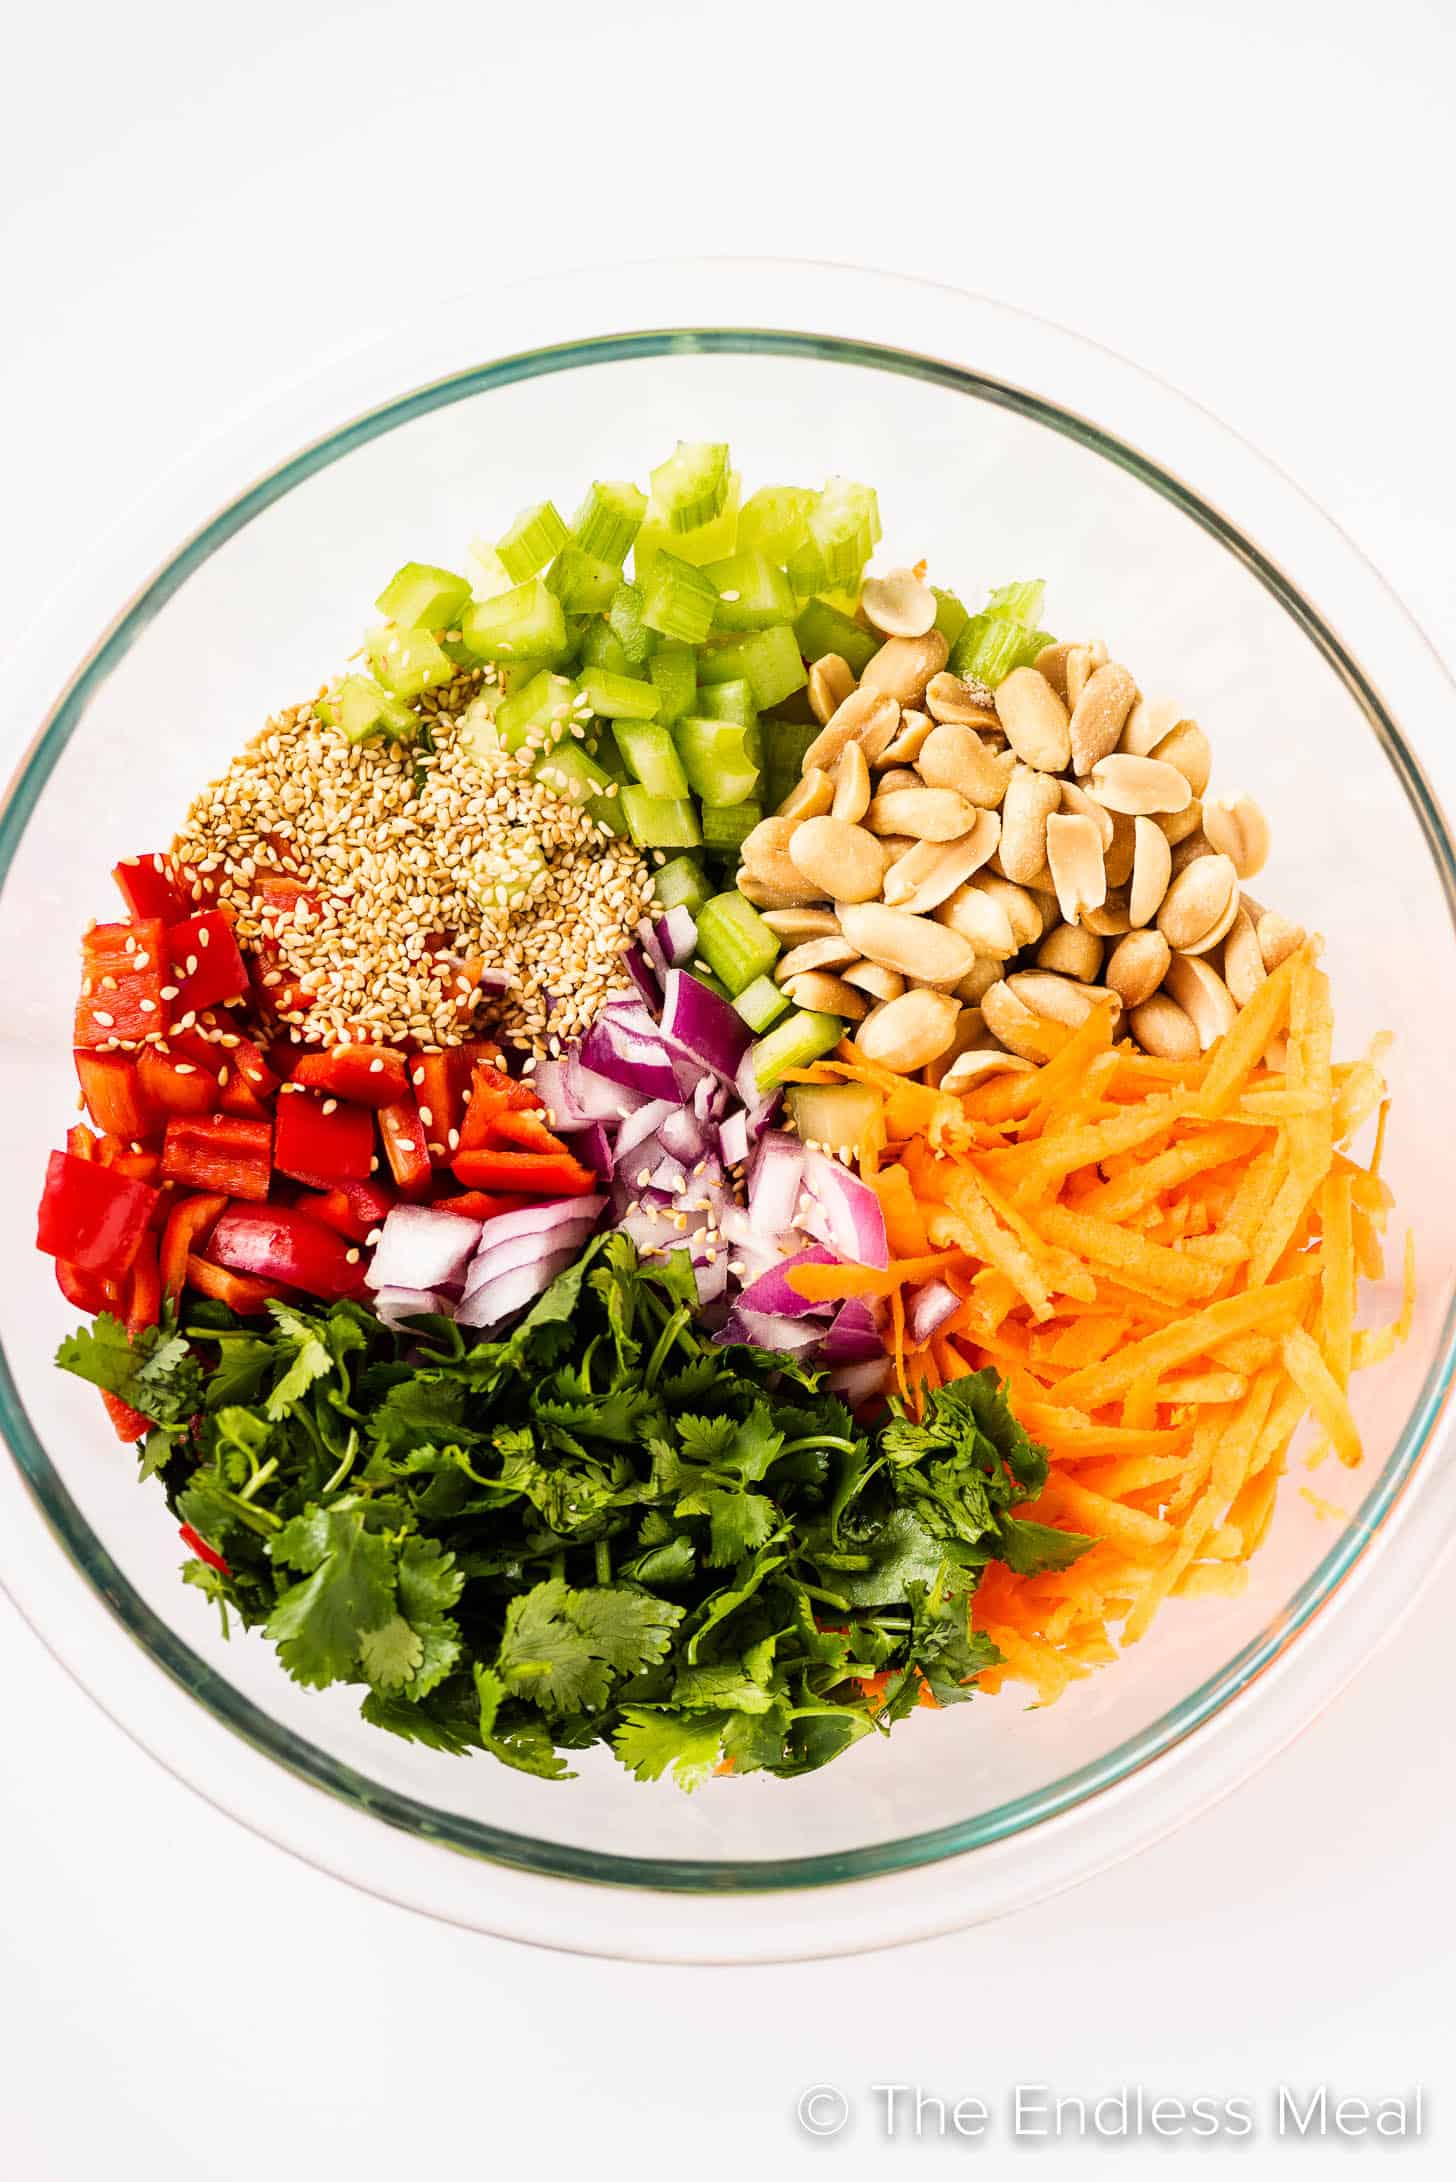 the ingredients for this Asian Salad Recipe in a glass bowl